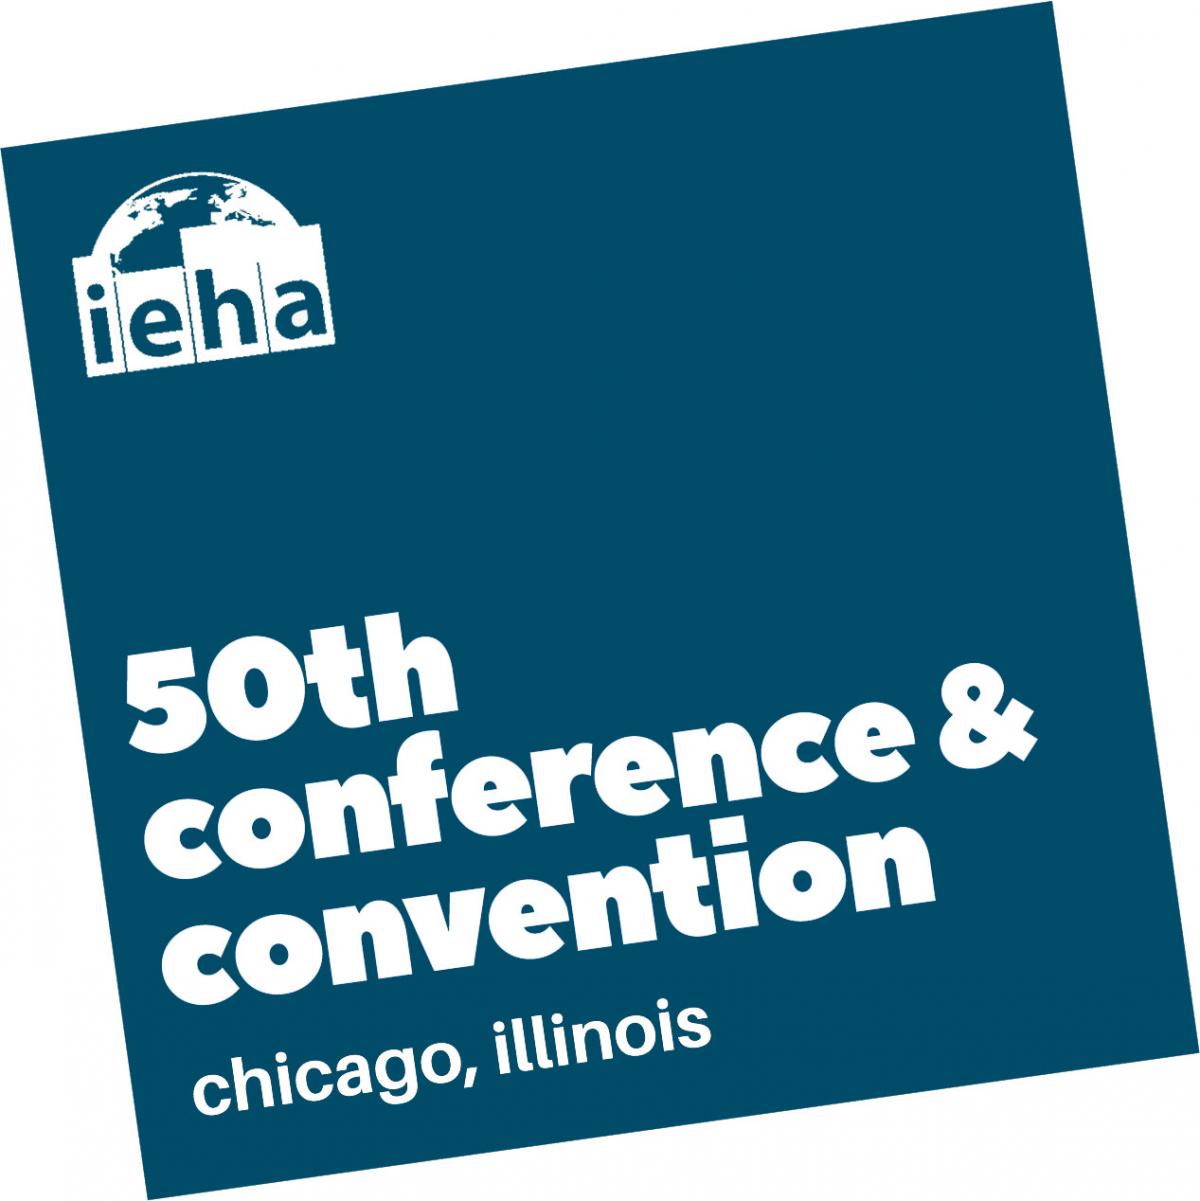 A Look Back Celebrating IEHA's 50th Conference and Convention in Chicago